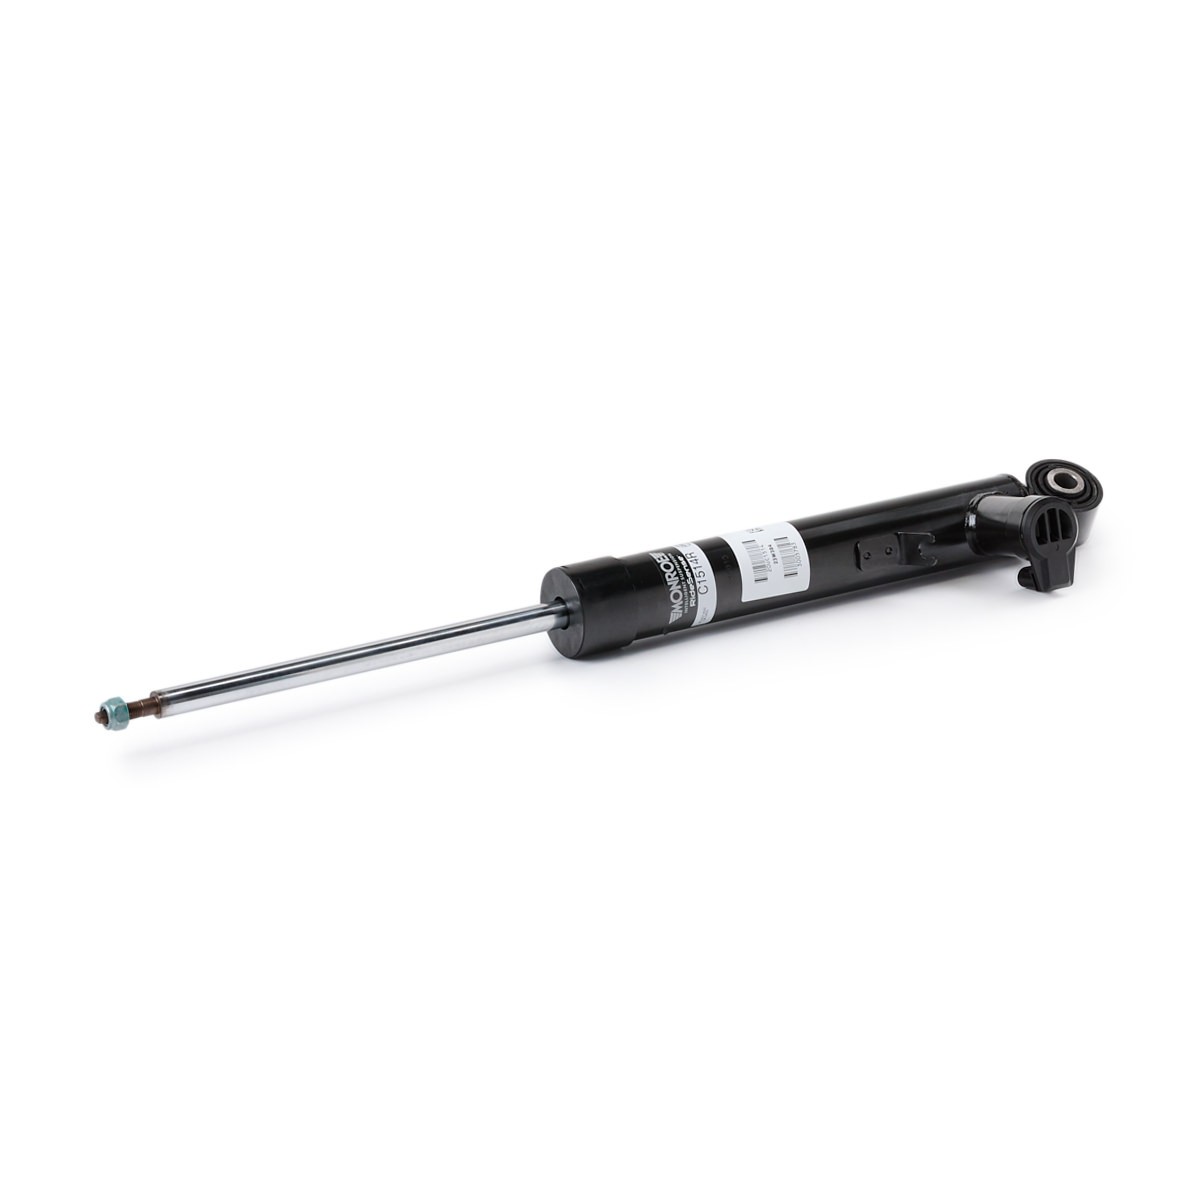 MONROE Shock absorber rear and front VW Passat B6 Saloon (3C2) new C1514R